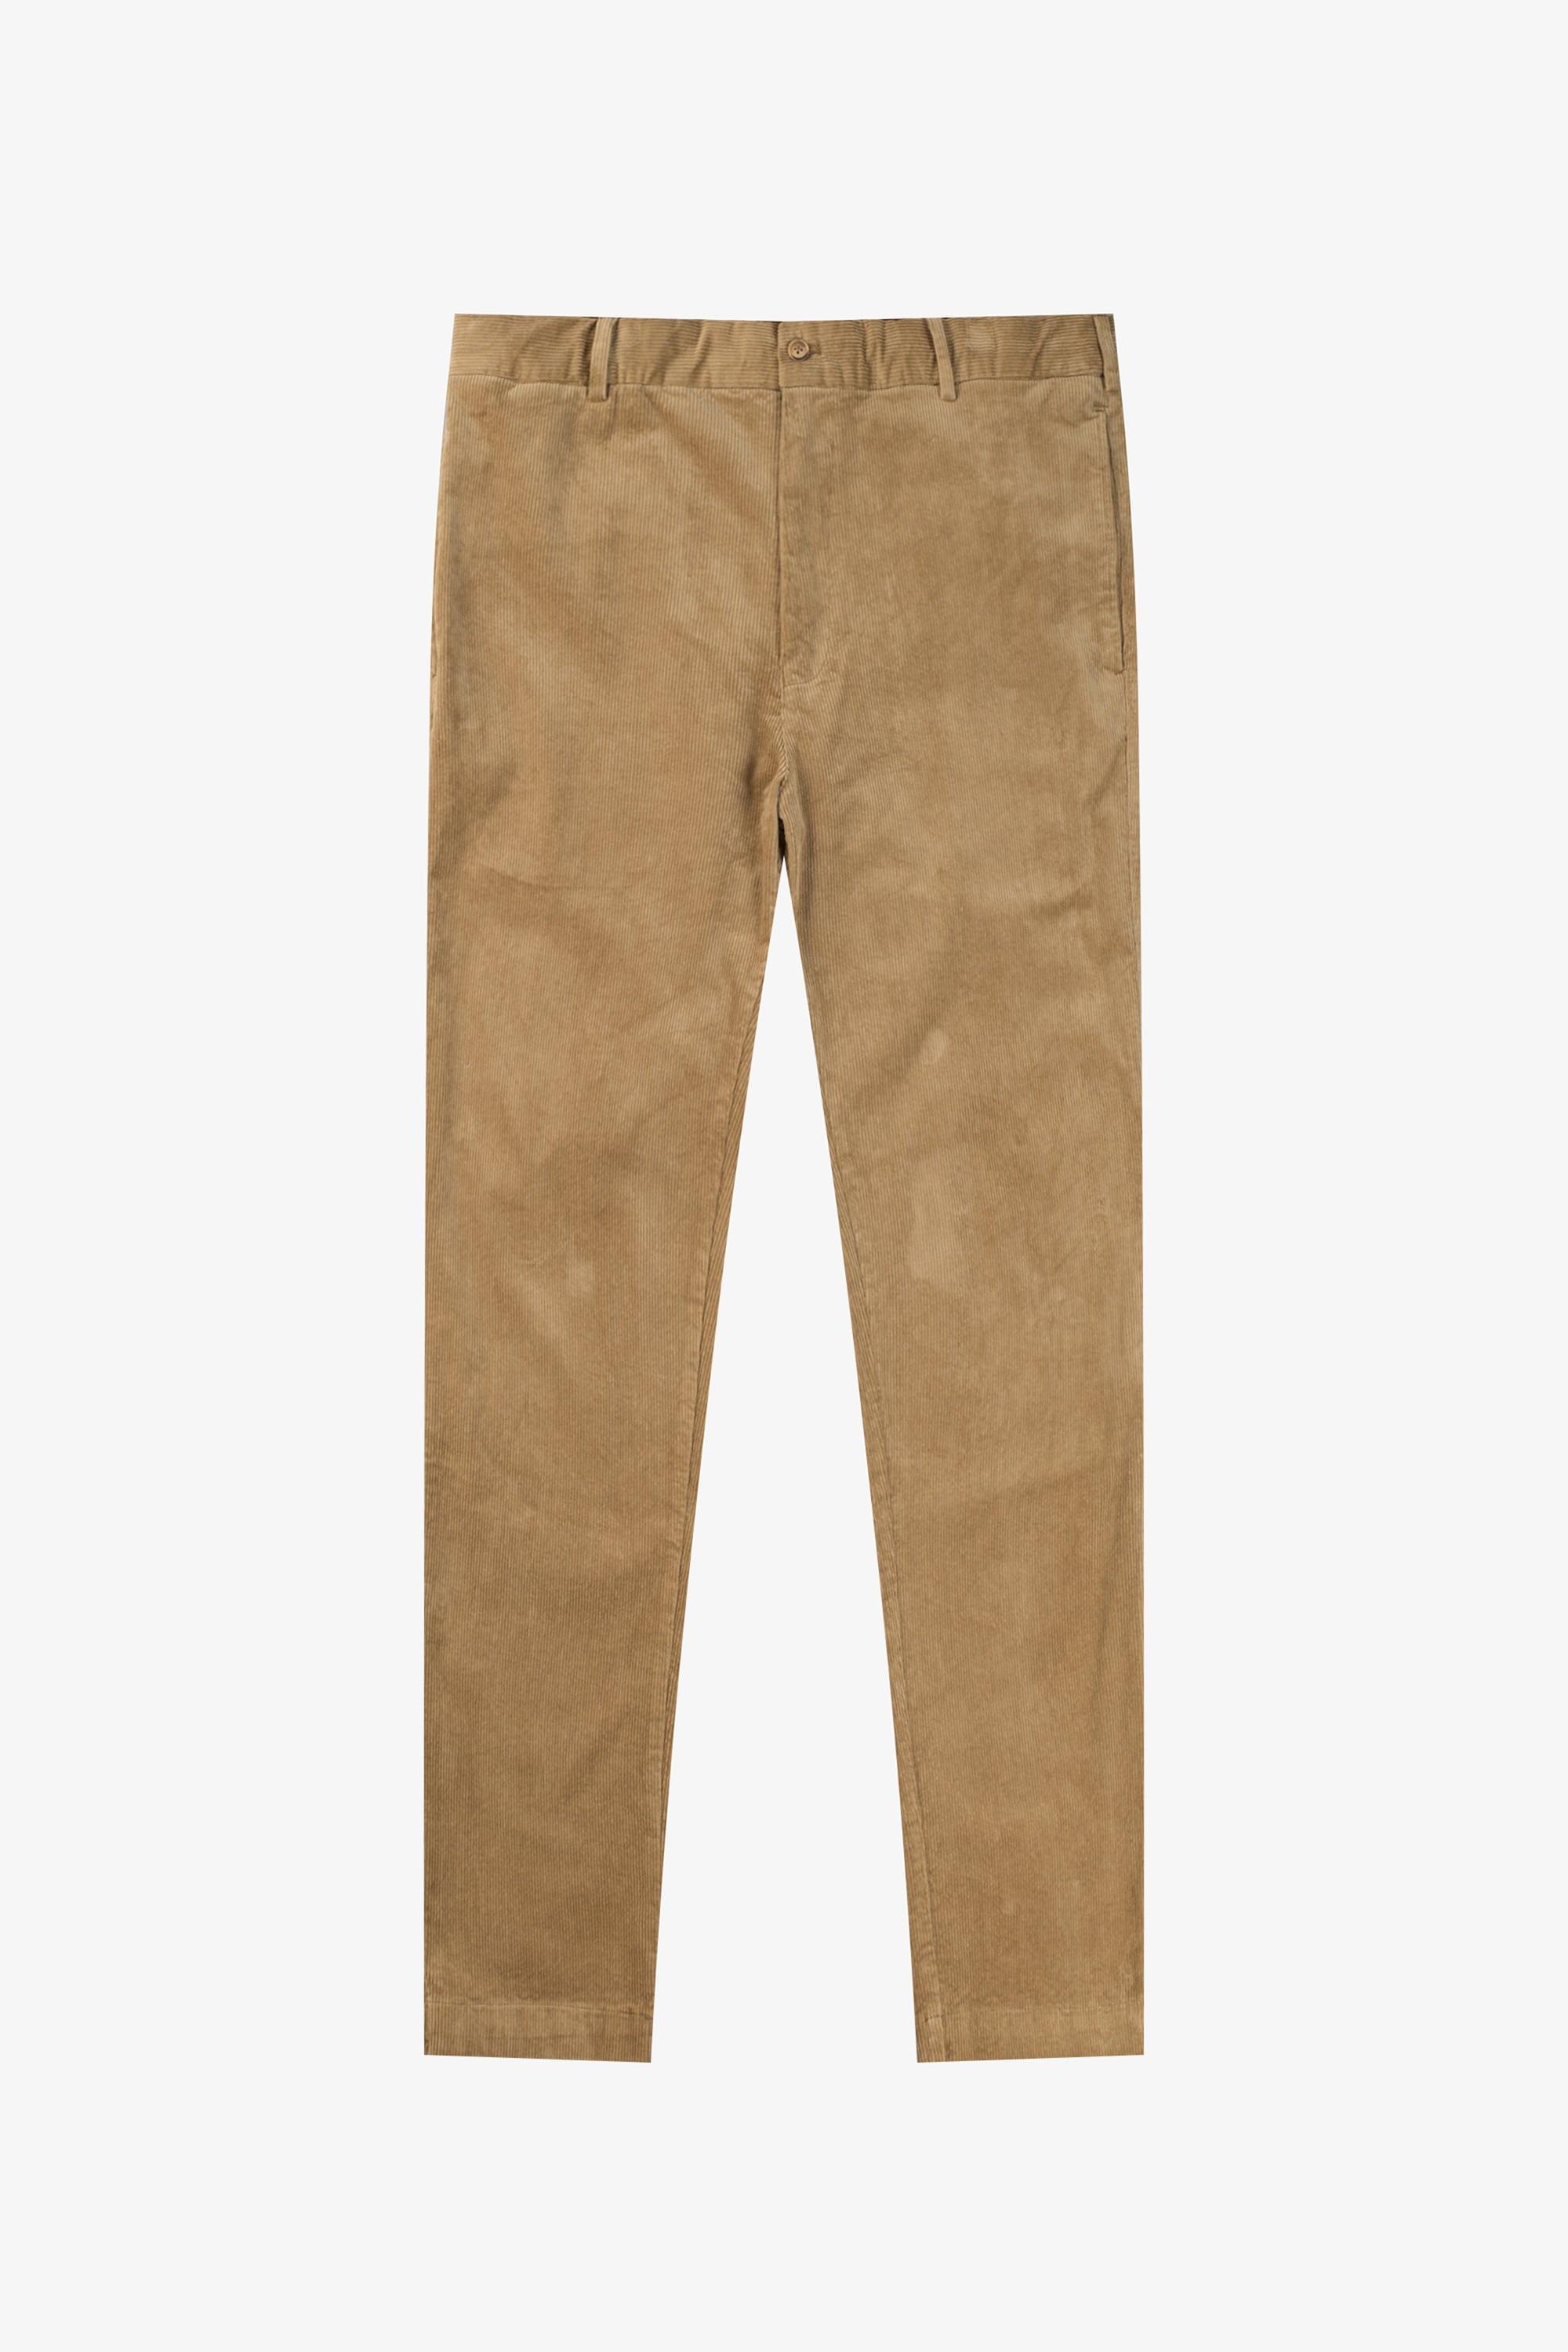 a pair of brown pants on a white background